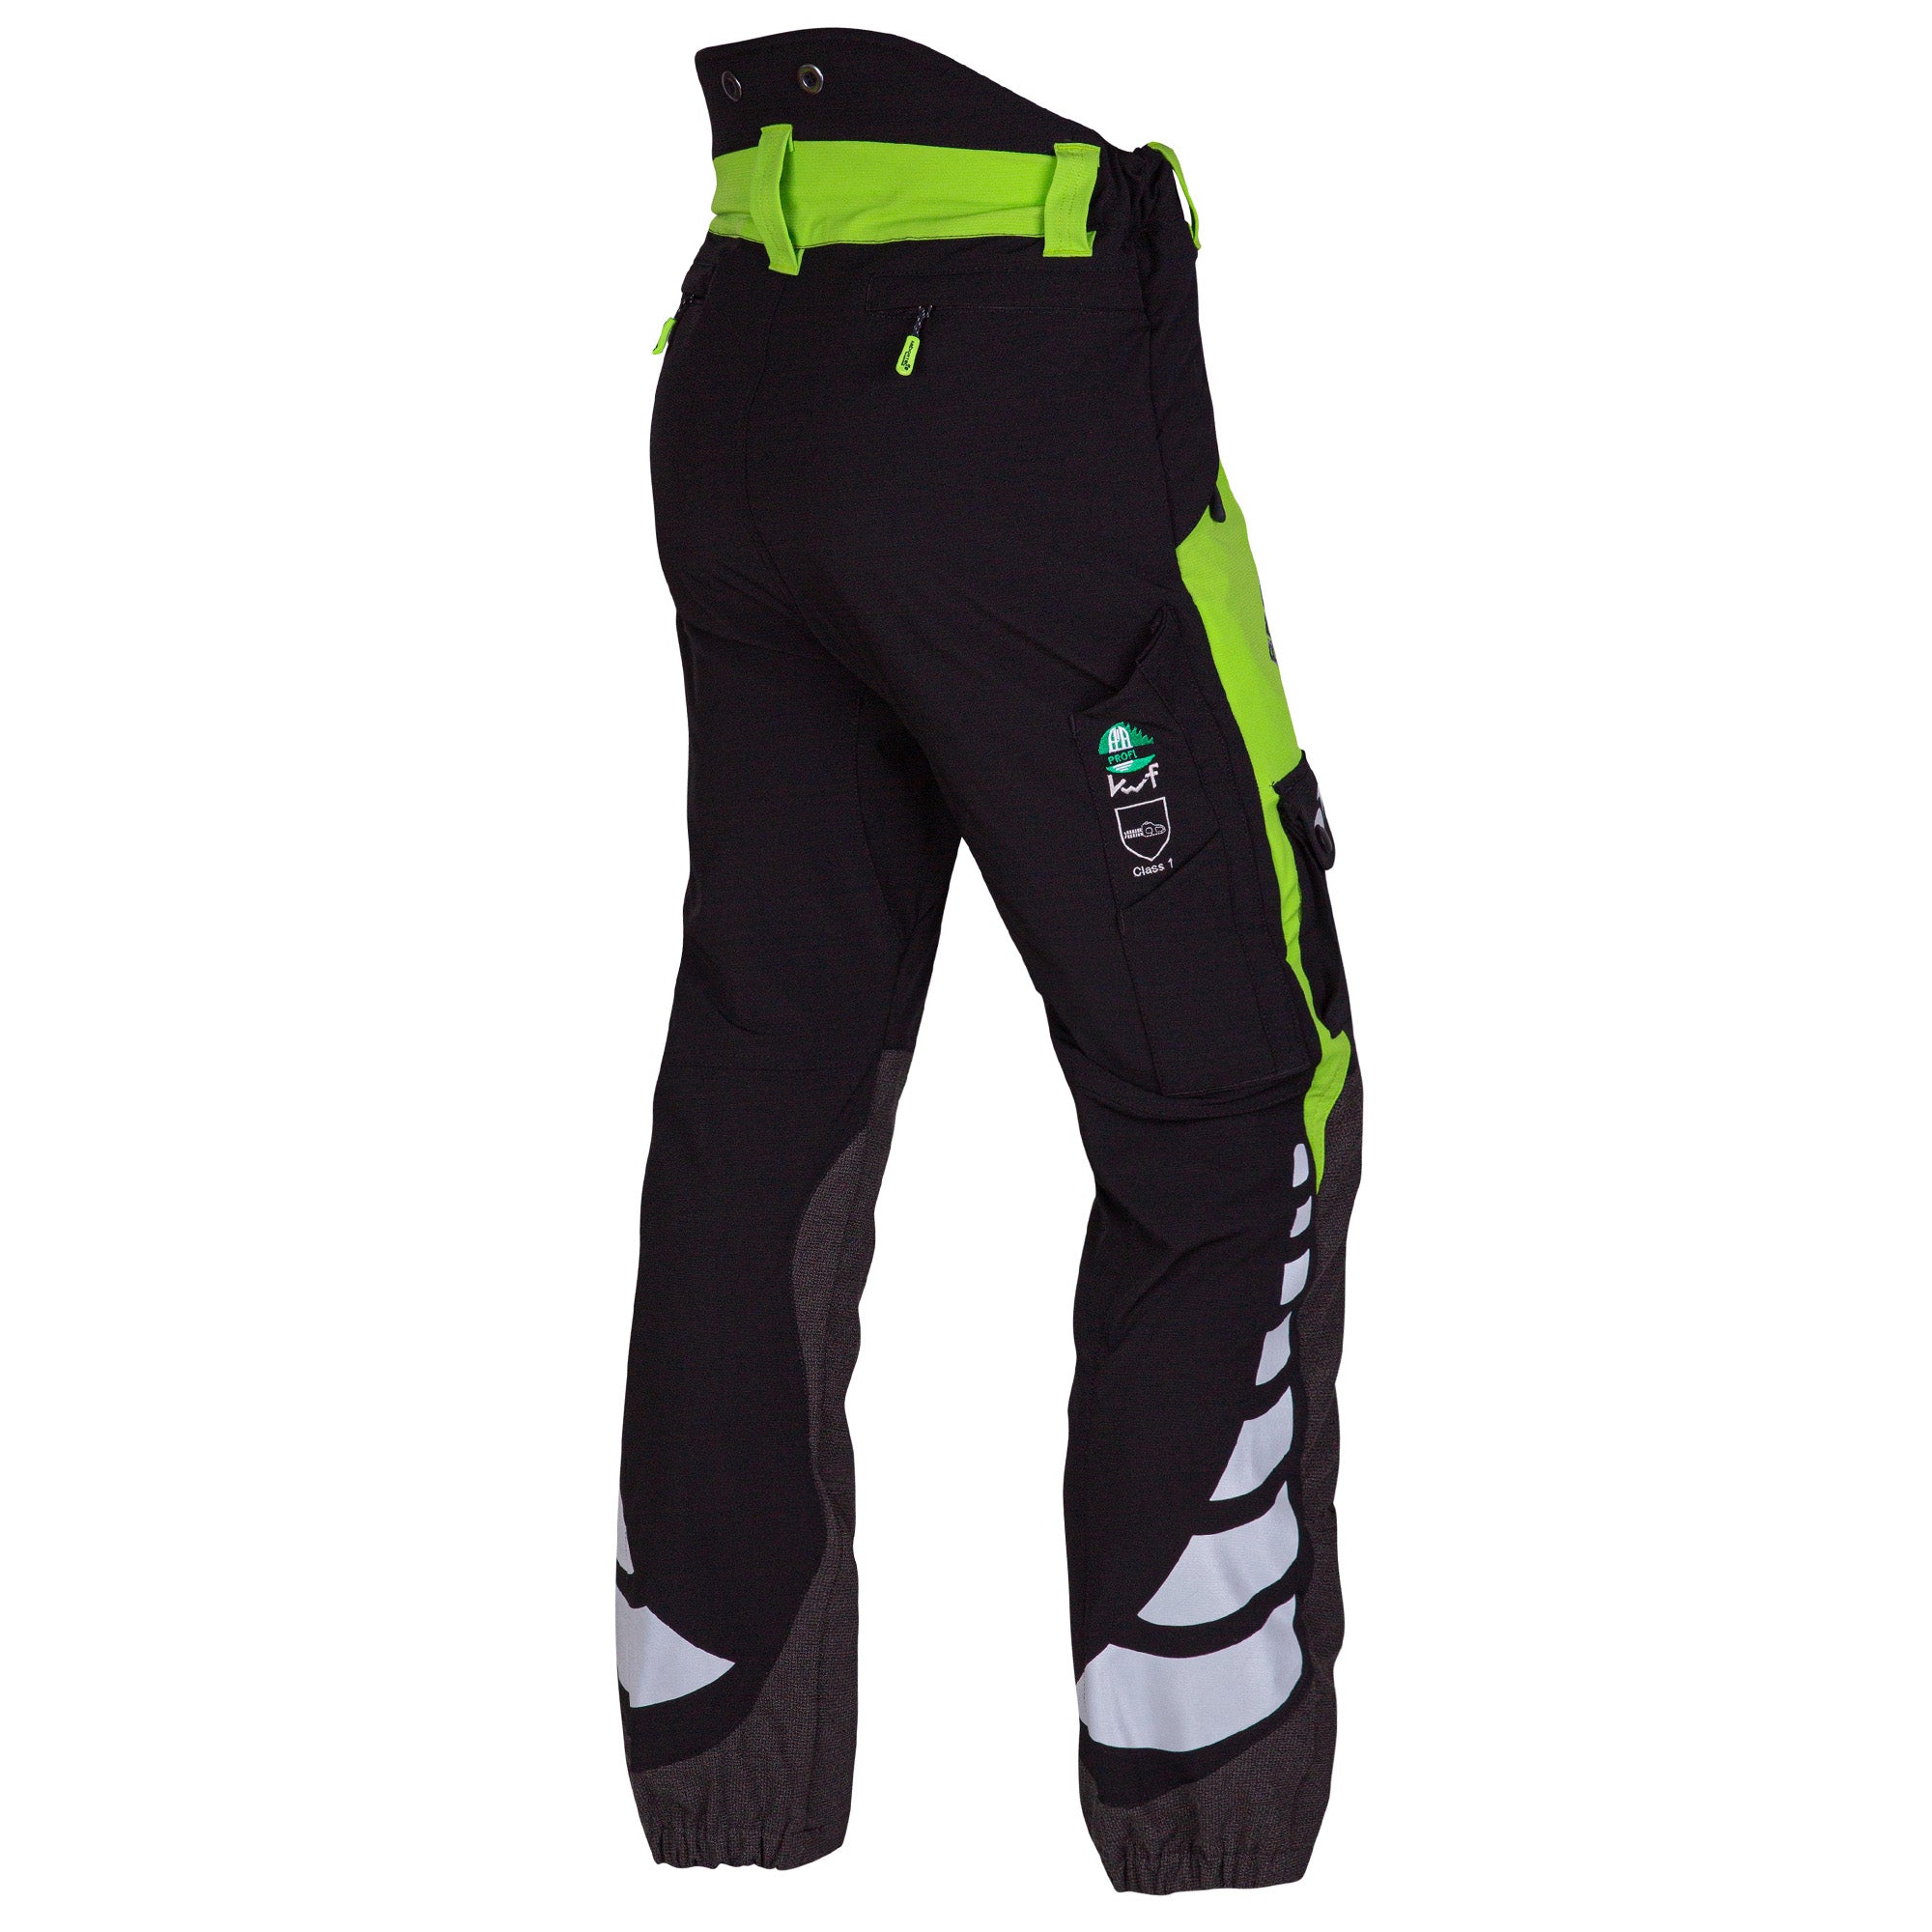 AT4030 Breatheflex Chainsaw Trousers Design A Class 3 - Lime.